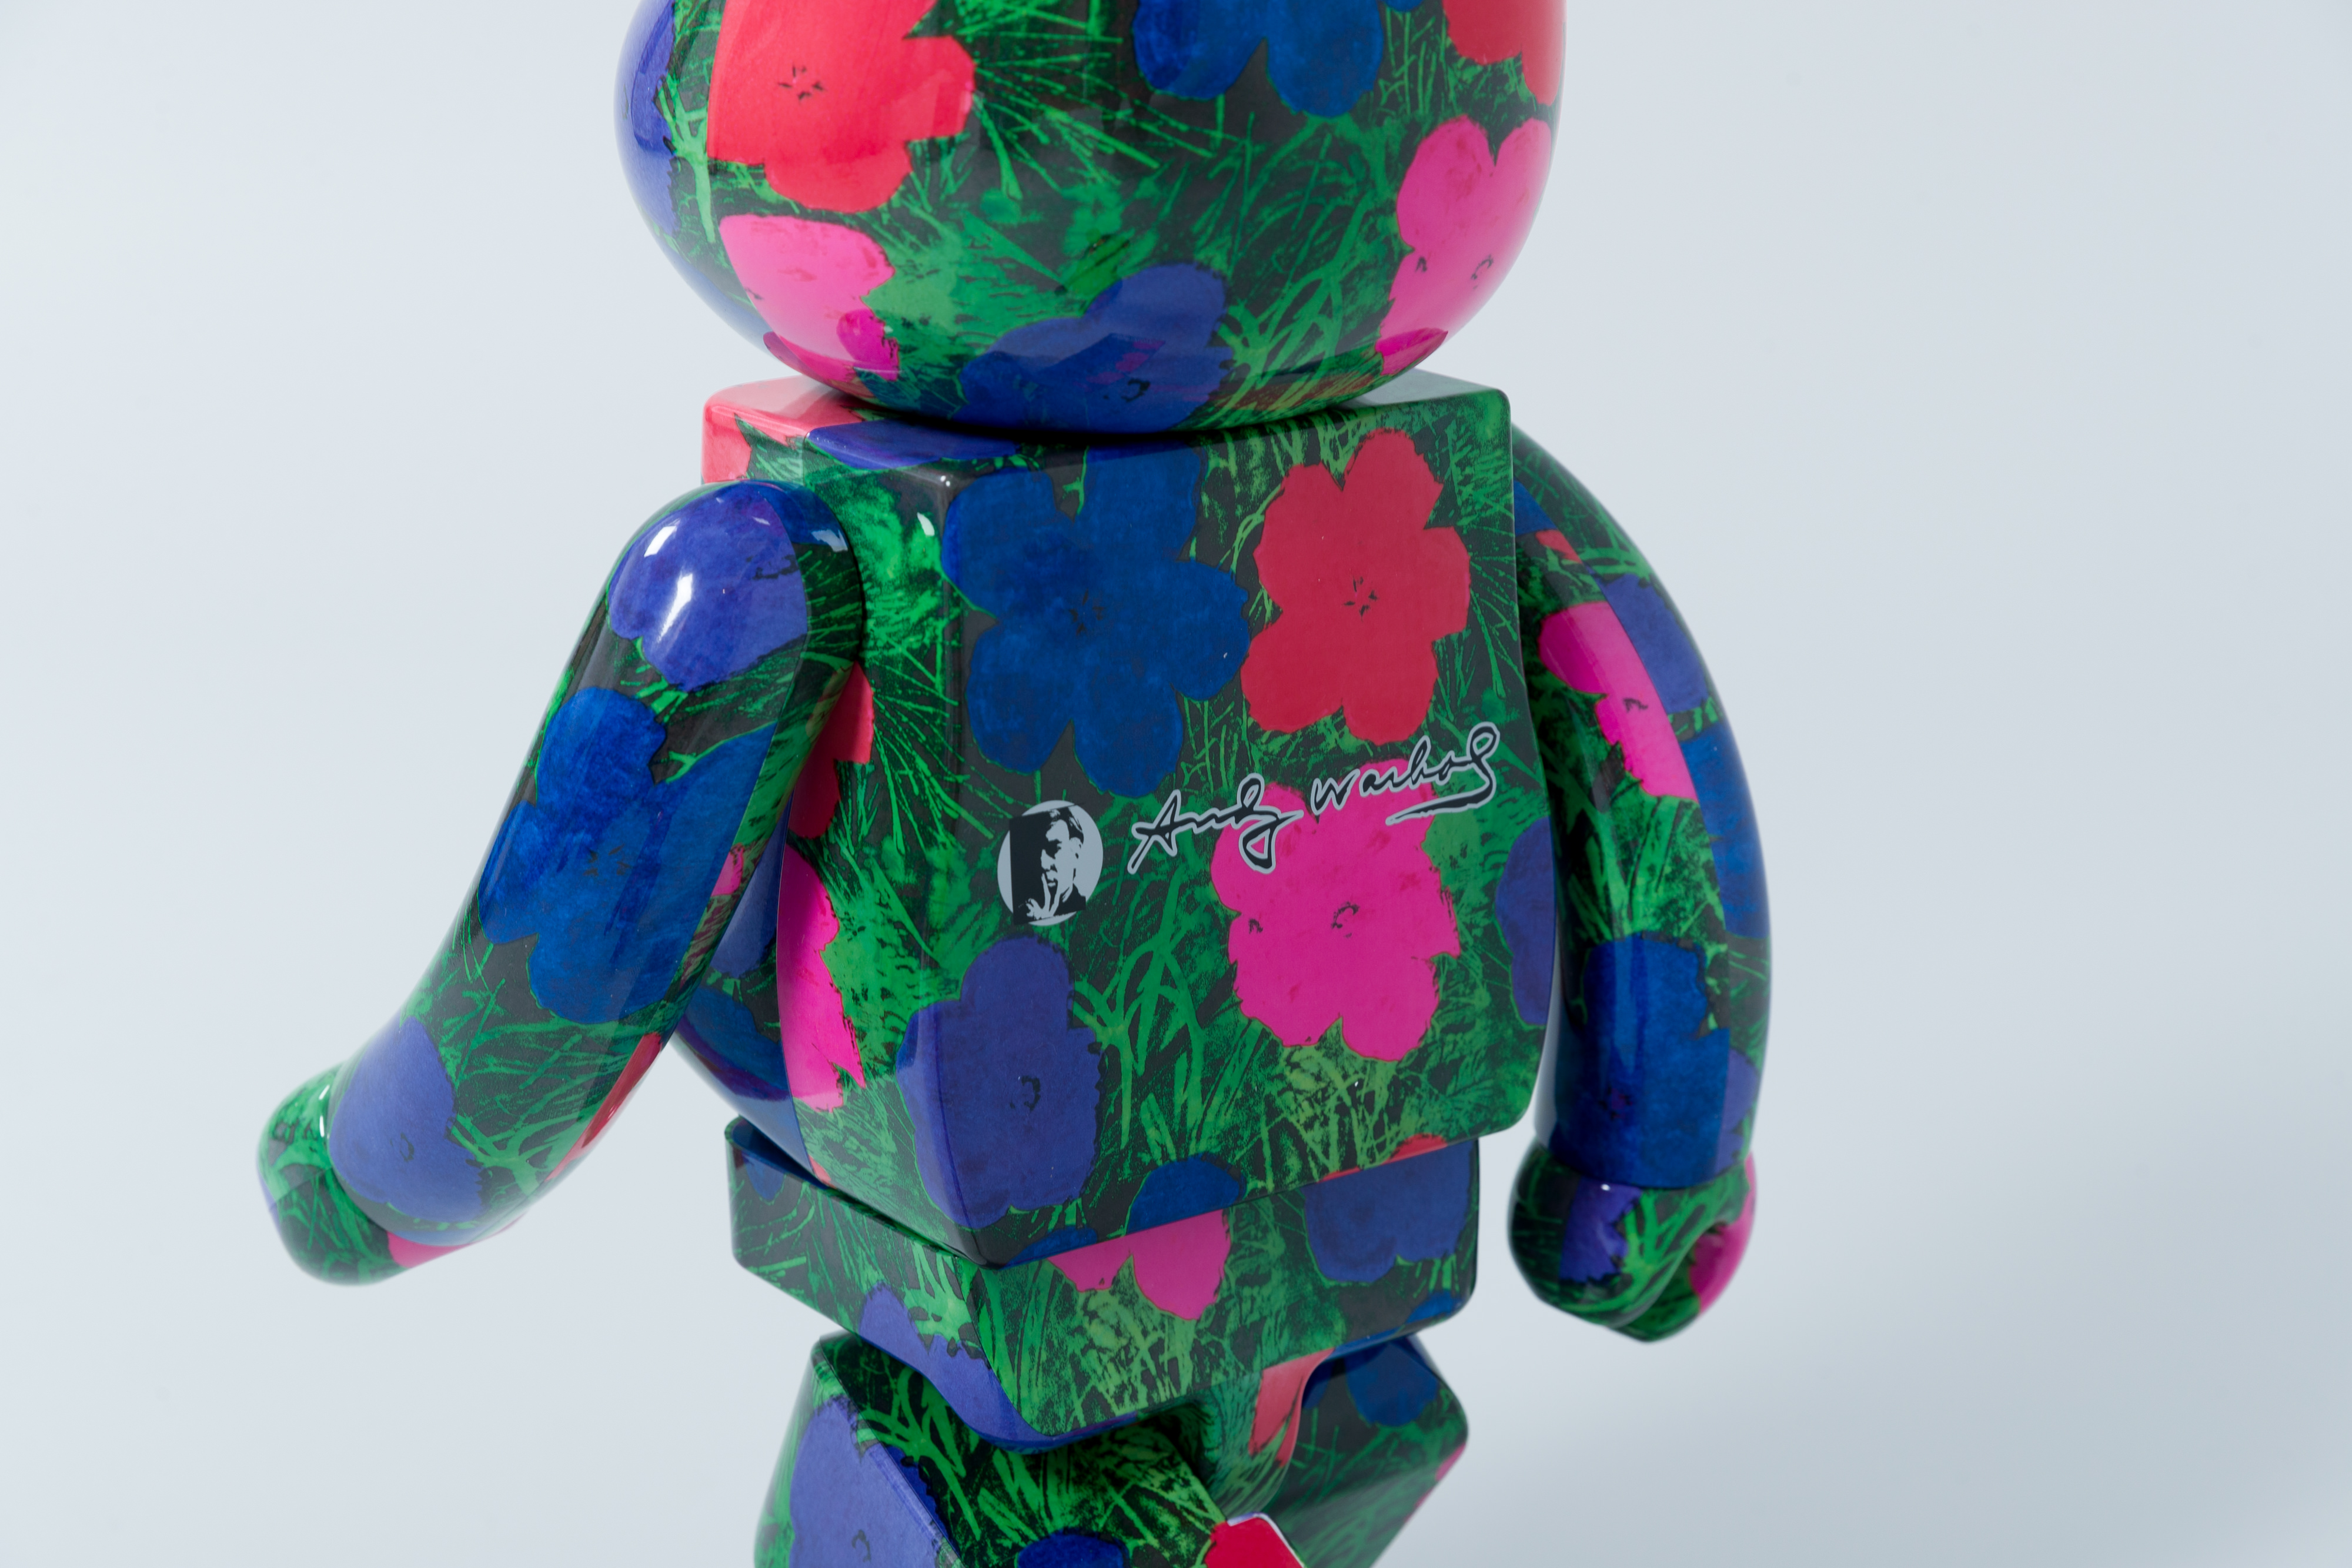 Medicom Toy - Andy Warhol 'Flower' 400% & 1000% Be@rbricks | Up There